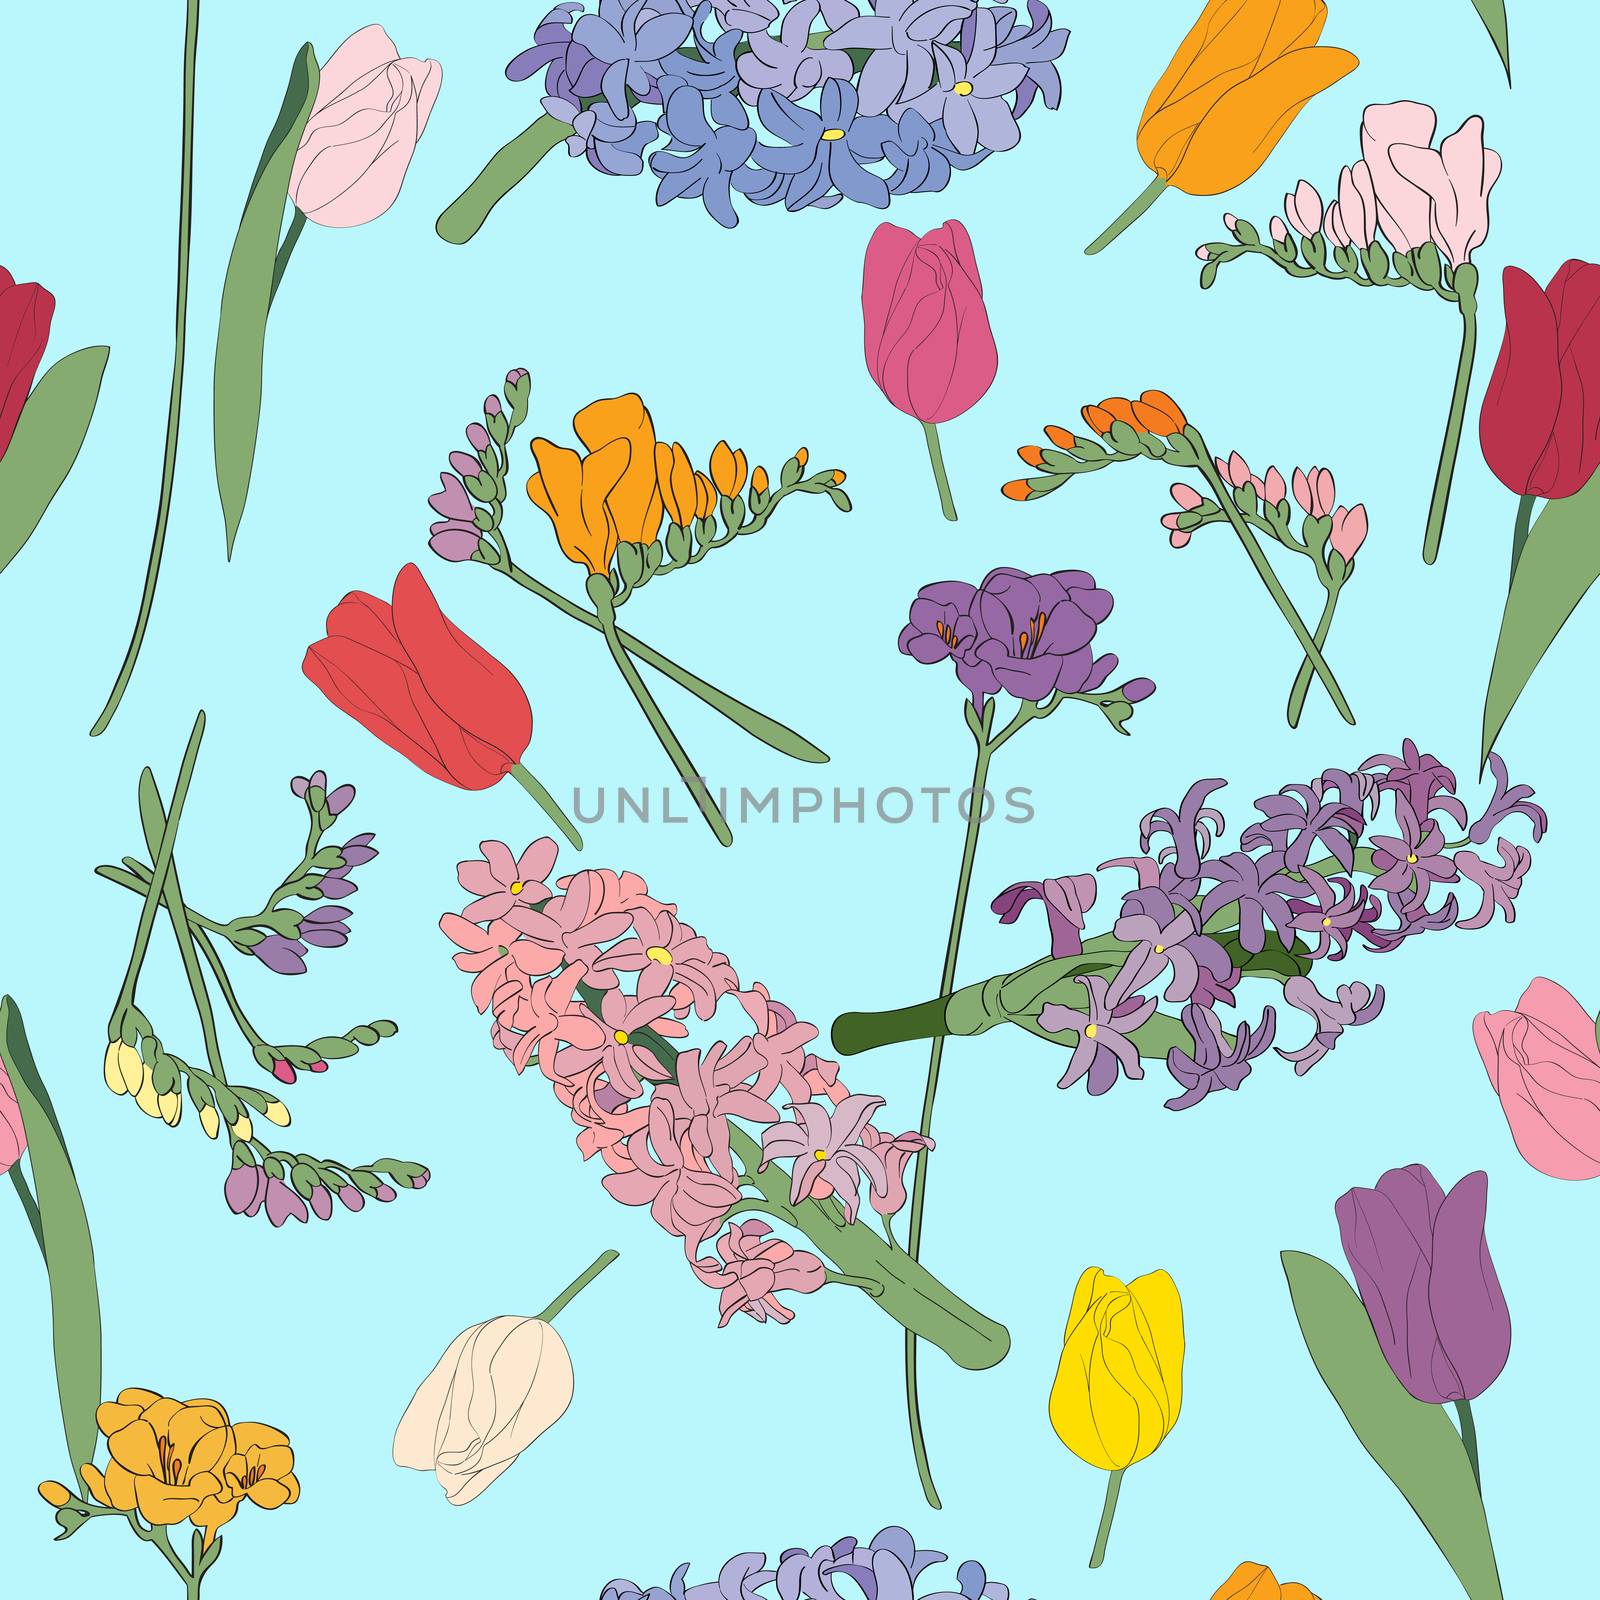 Spring flowers seamless pattern, beautiful hand drawn illustration over blue background